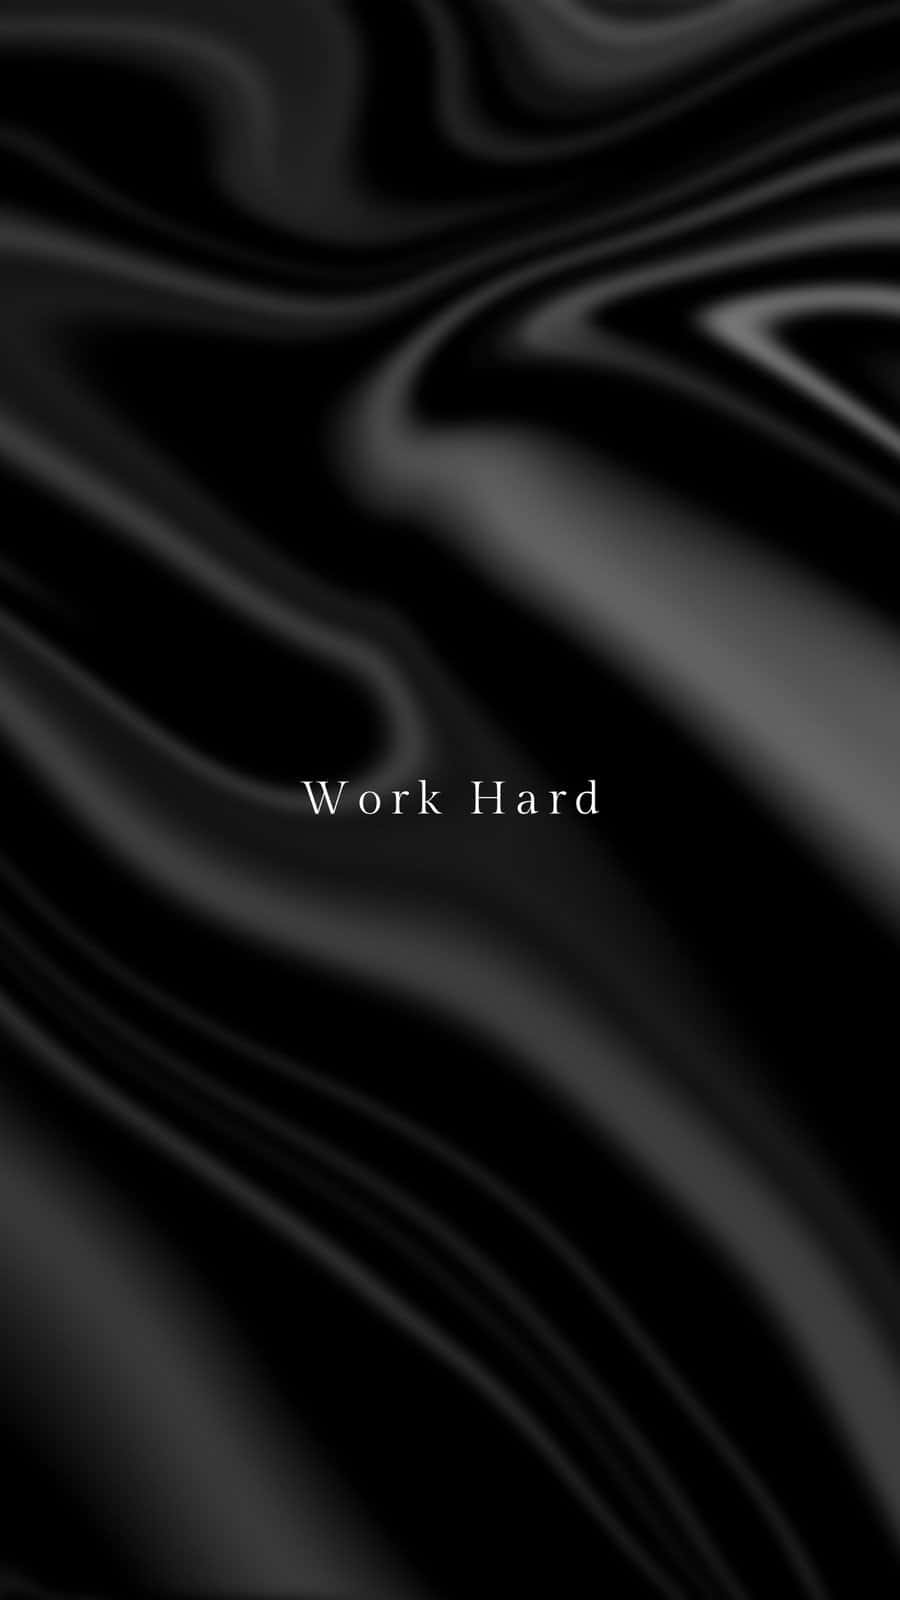 Work Hard - A Black Background With The Words Work Hard